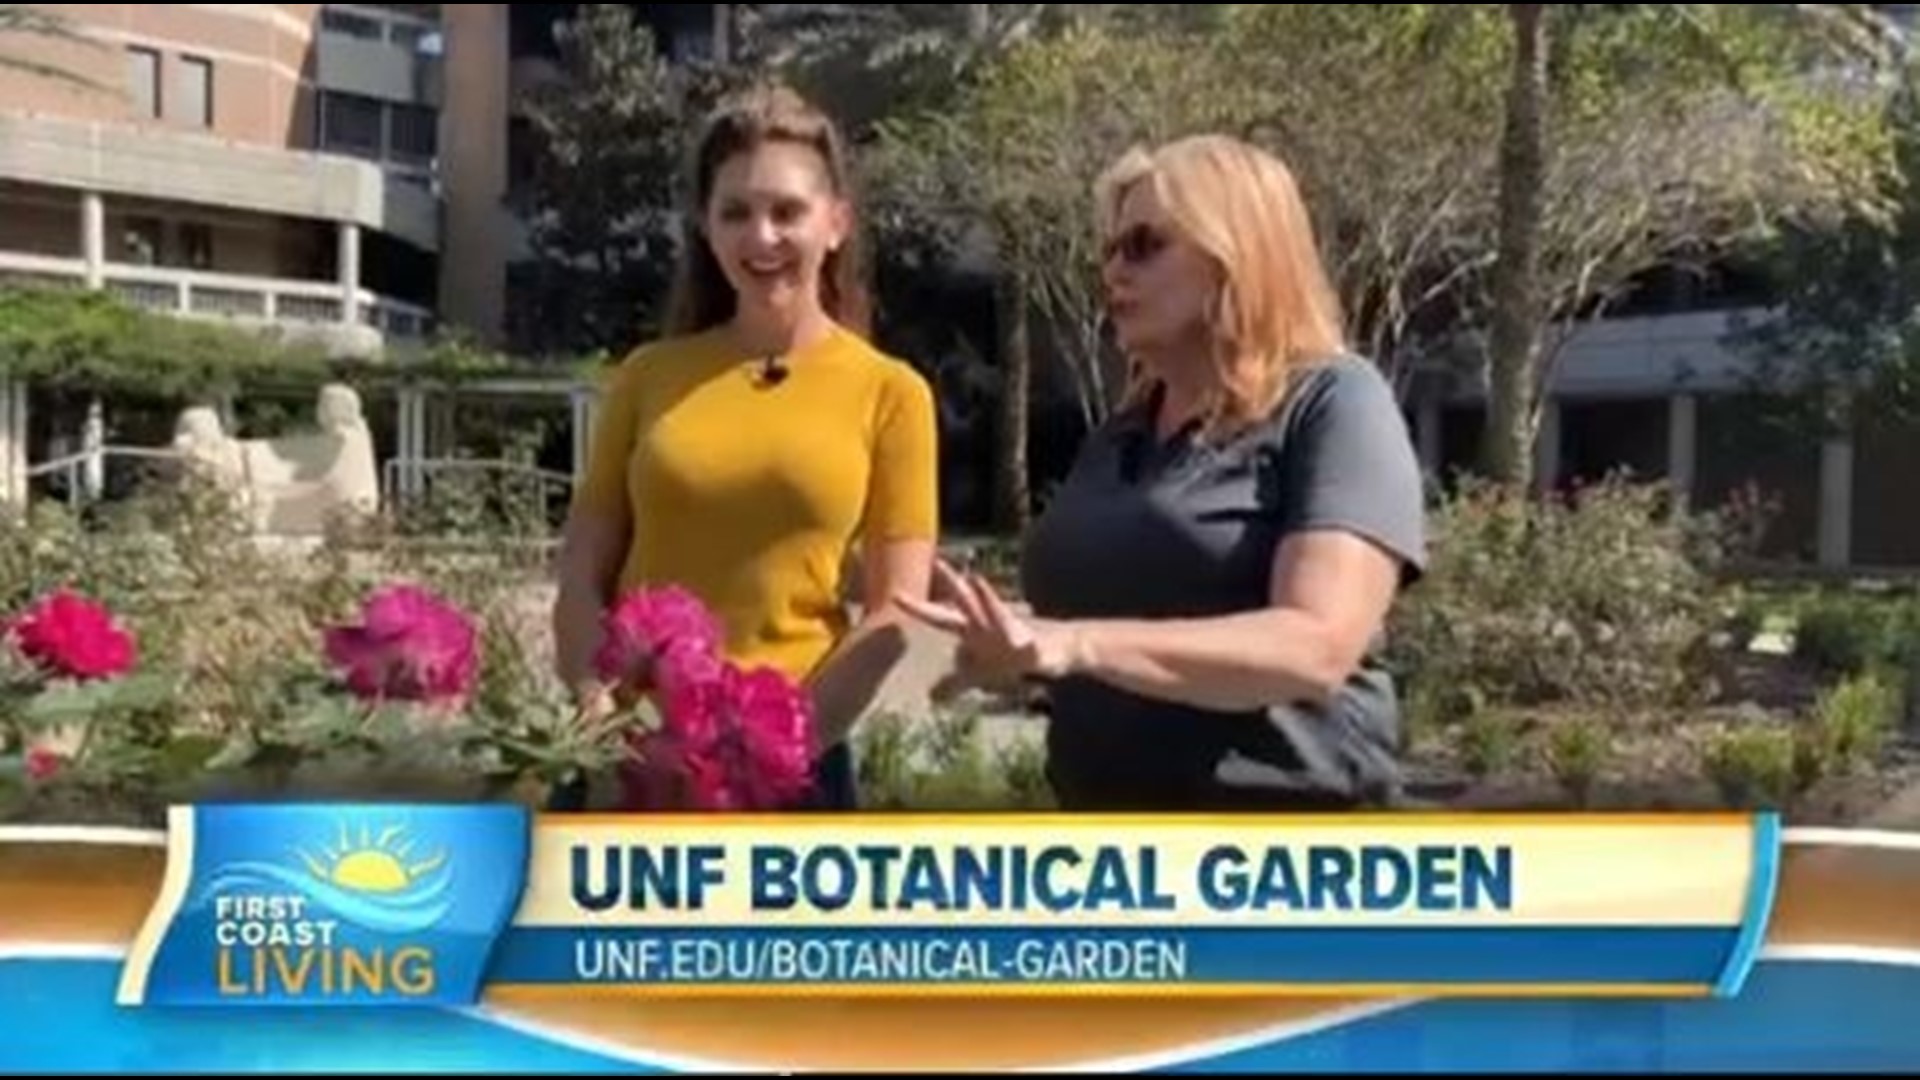 UNF Horticulturist and Botanical Garden designer, Rhonda Gracie takes Jordan Wilkerson on a tour of the beautiful and relaxing UNF gardens.